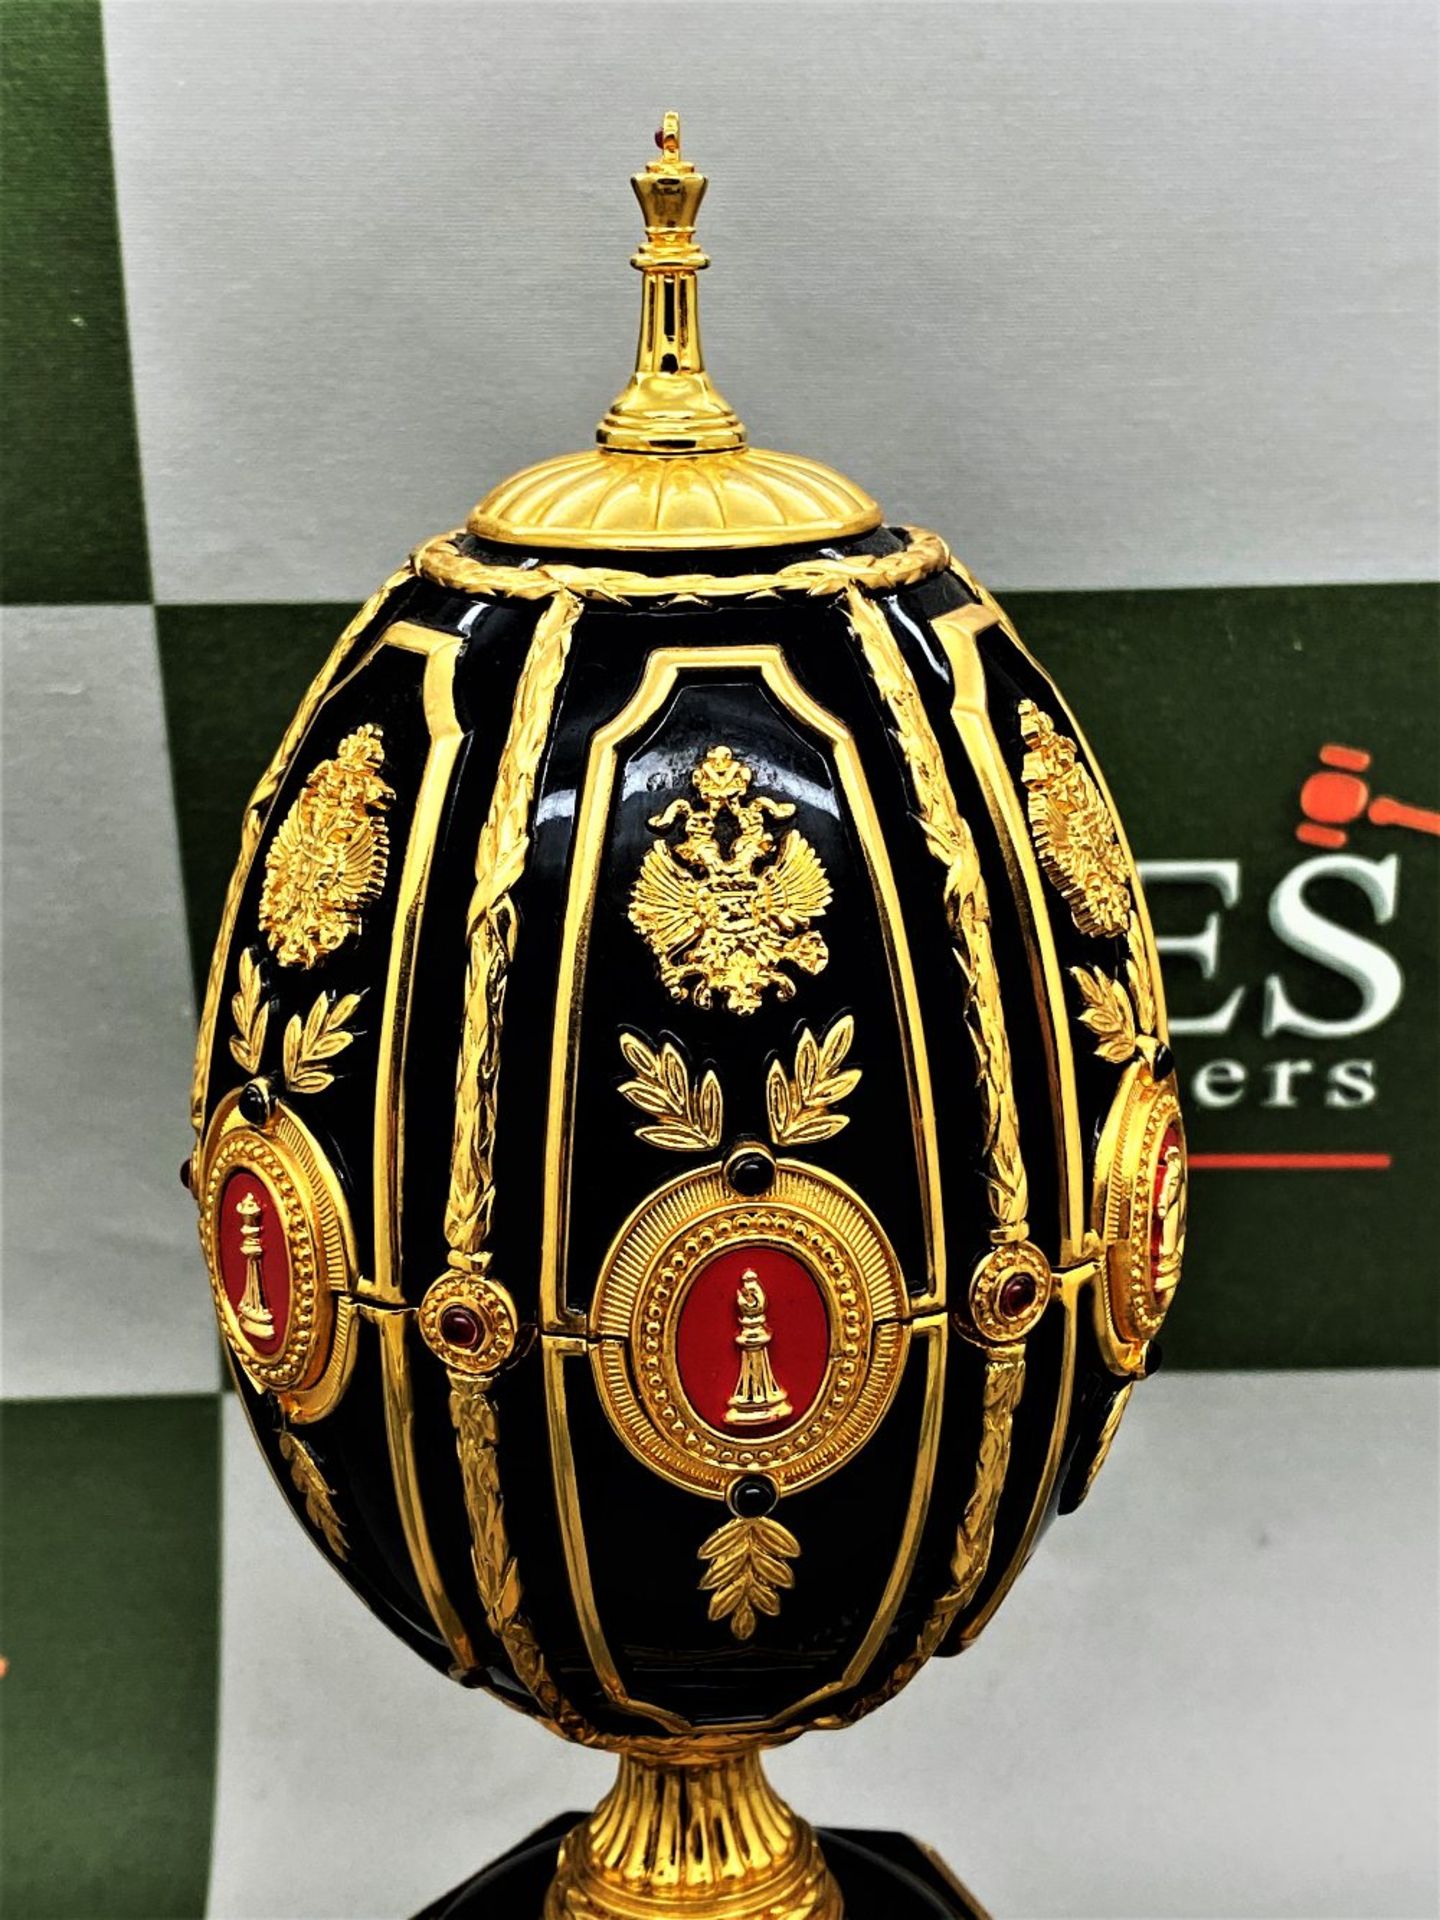 Faberge 24 Ct Gold "The Imperial Jeweled Egg Chess Set" - Image 3 of 6